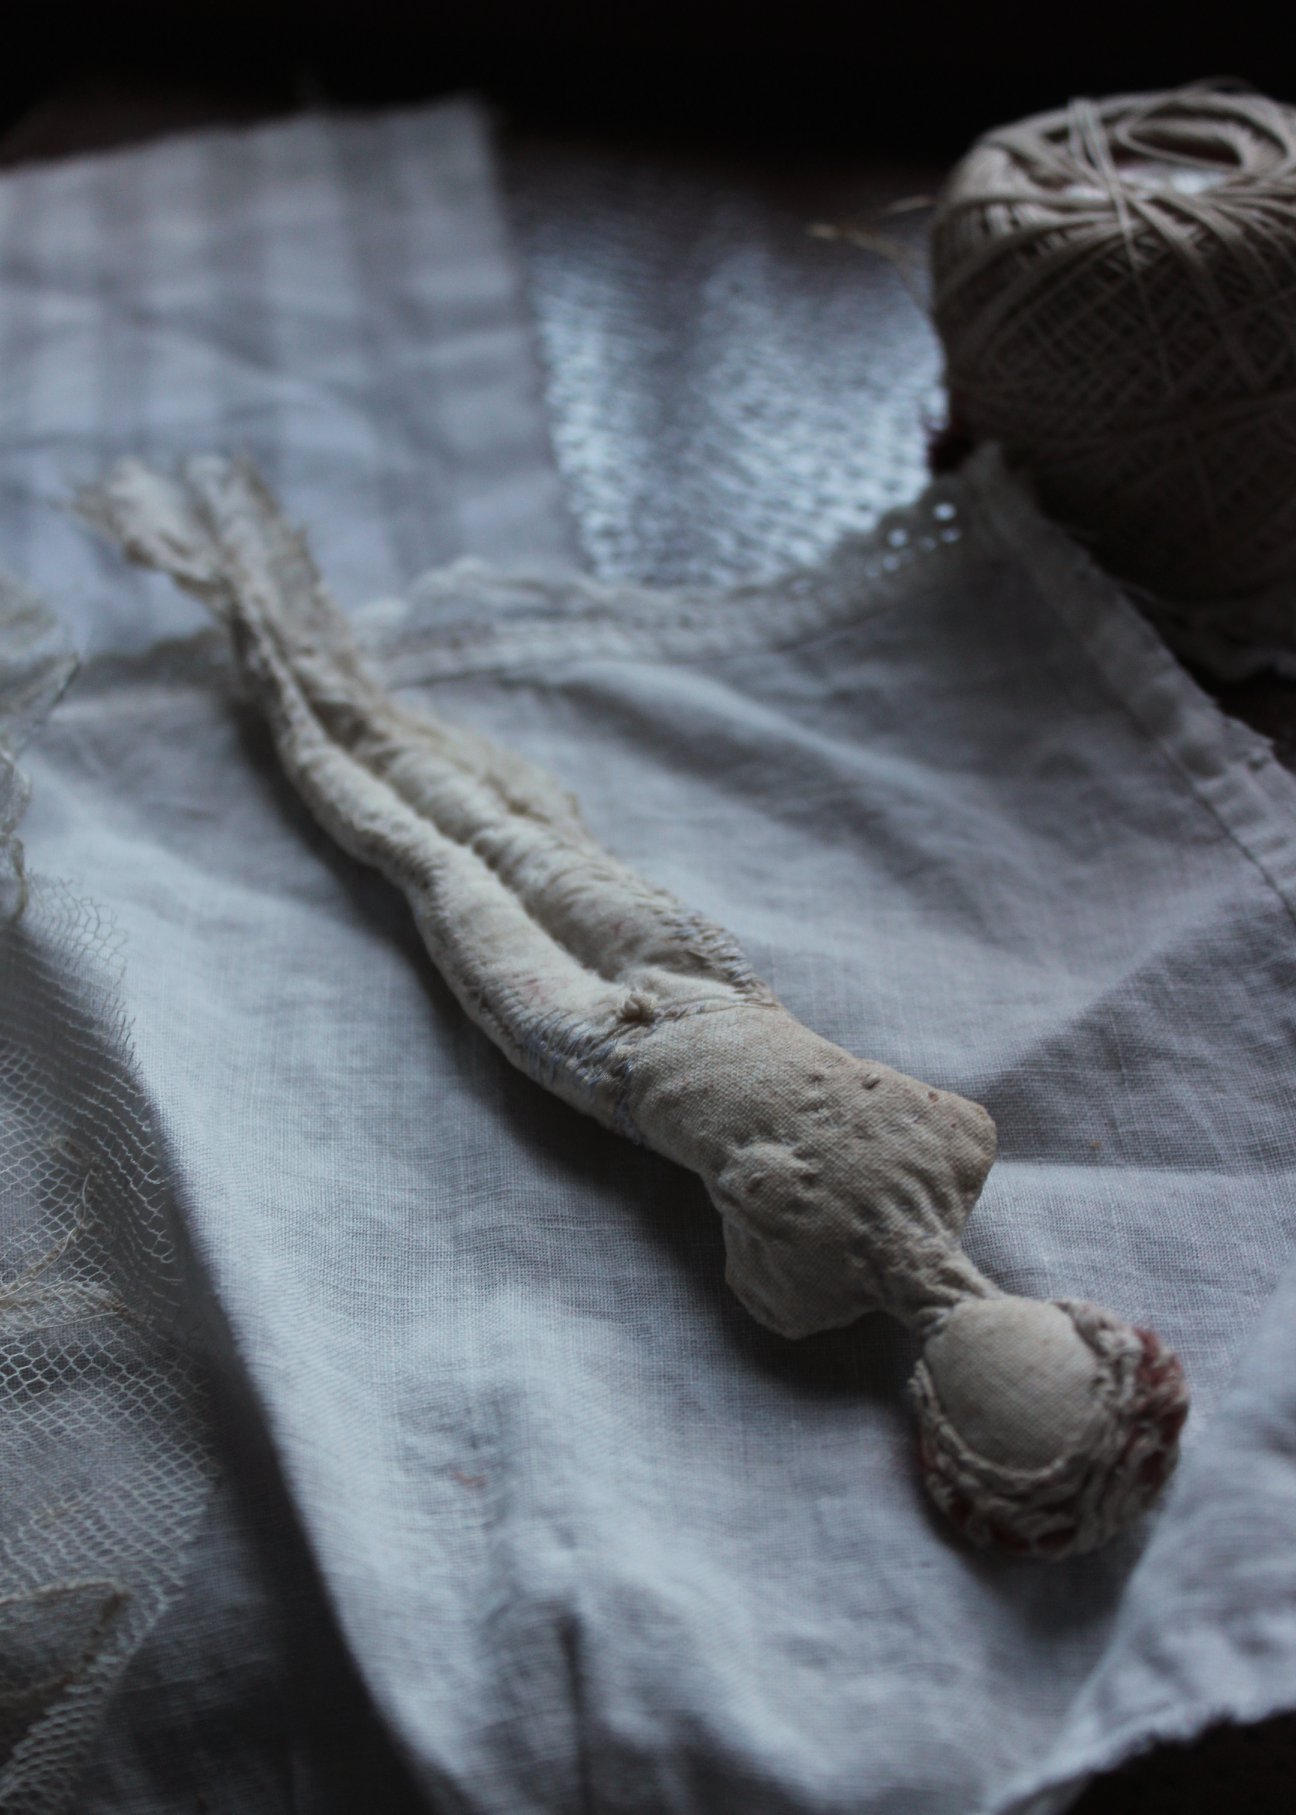 Figurative Textiles with The Pale Rook Image #2